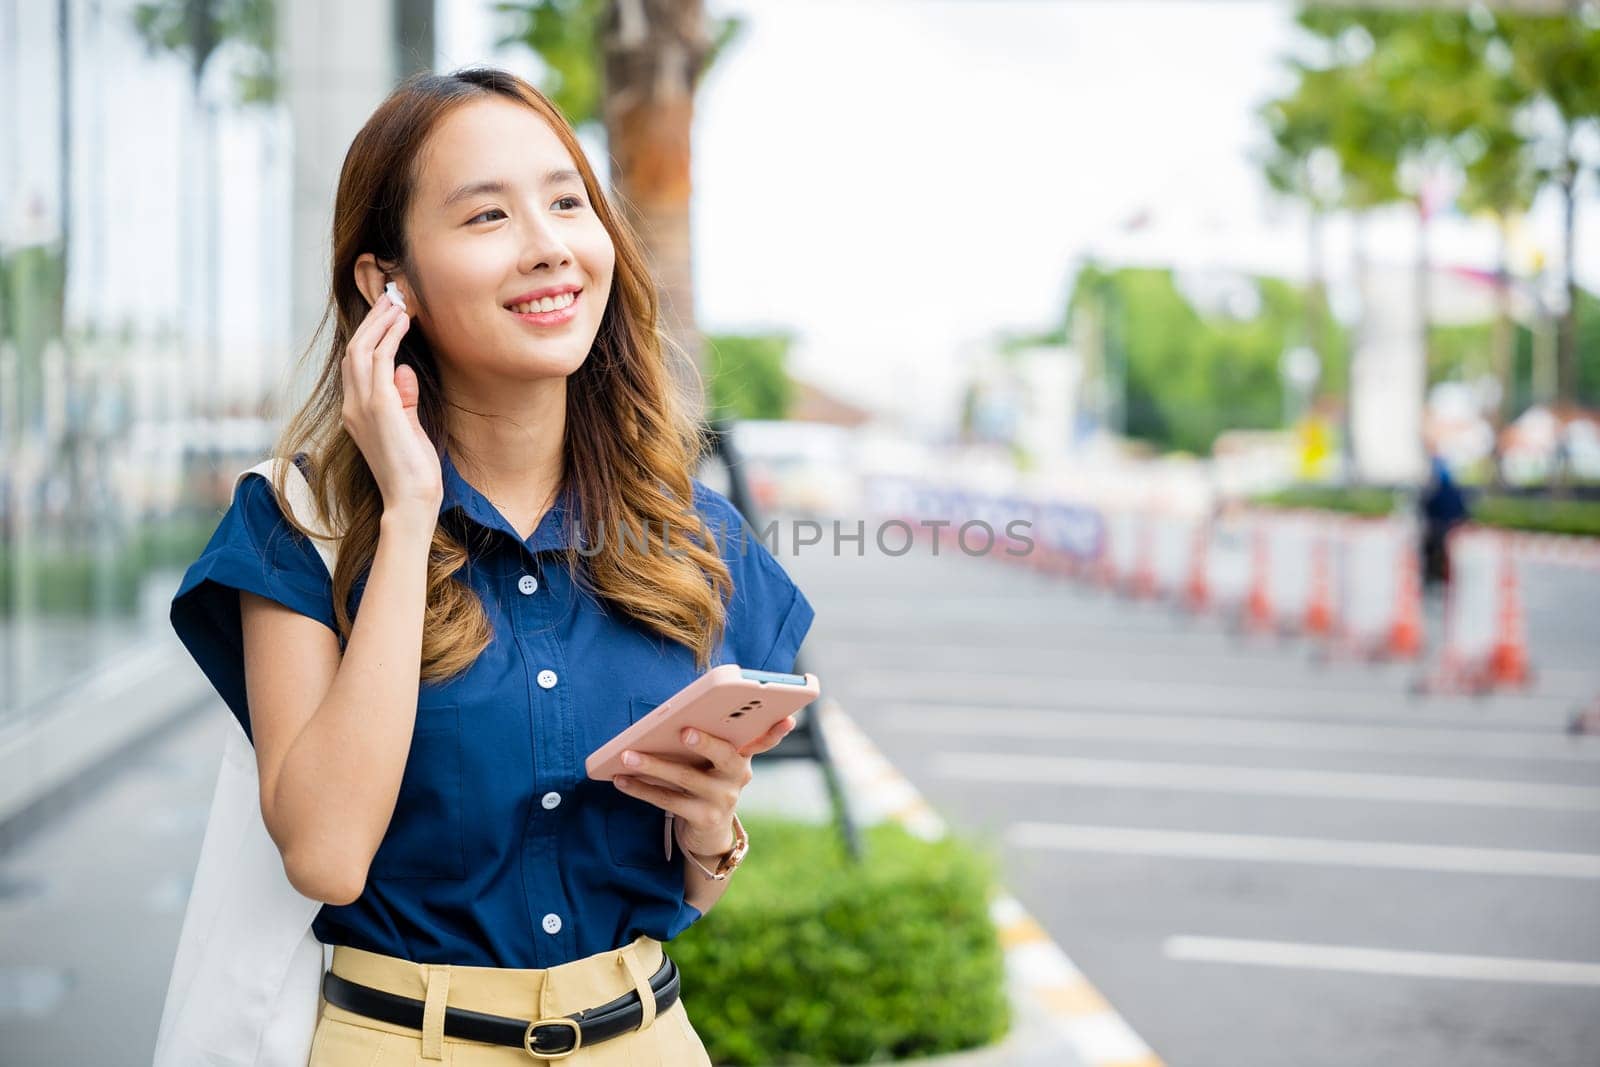 Happy young woman multitasking with wireless earbuds and smartphone in an urban environment. She's a portrait of a modern entrepreneur.